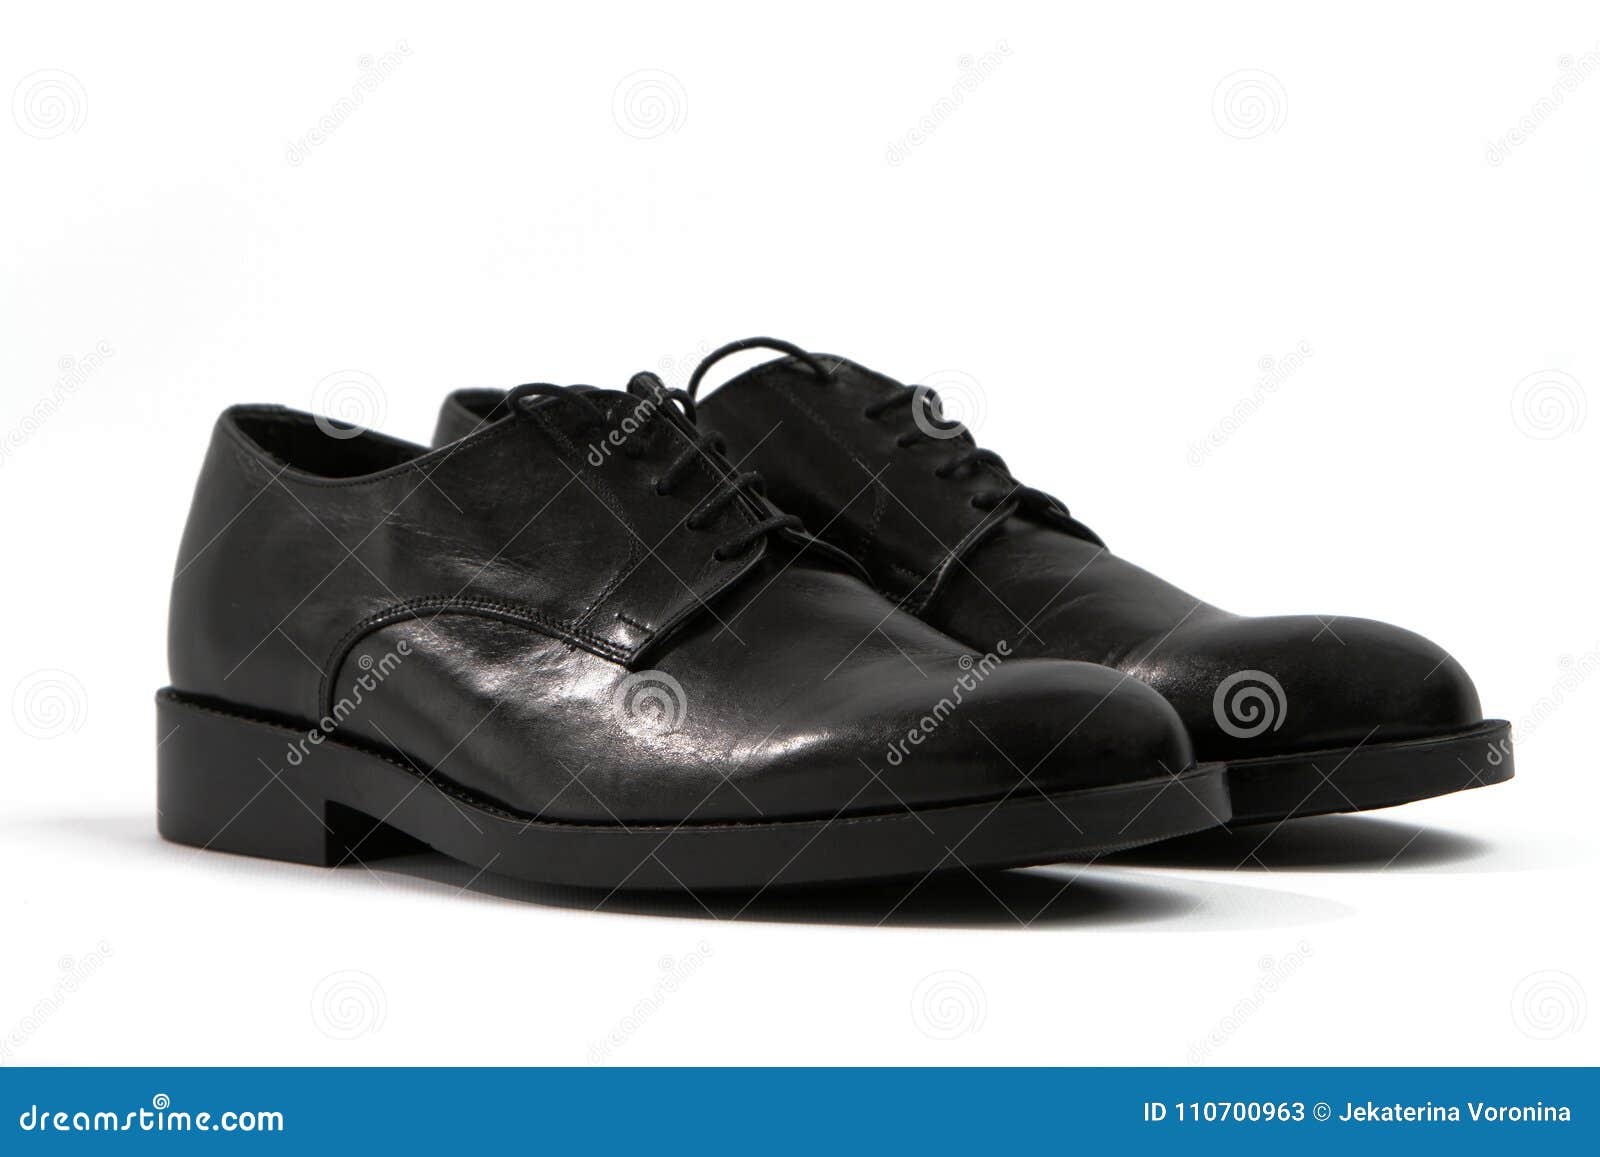 Male Black Shoes on a White Background Stock Image - Image of cutout ...